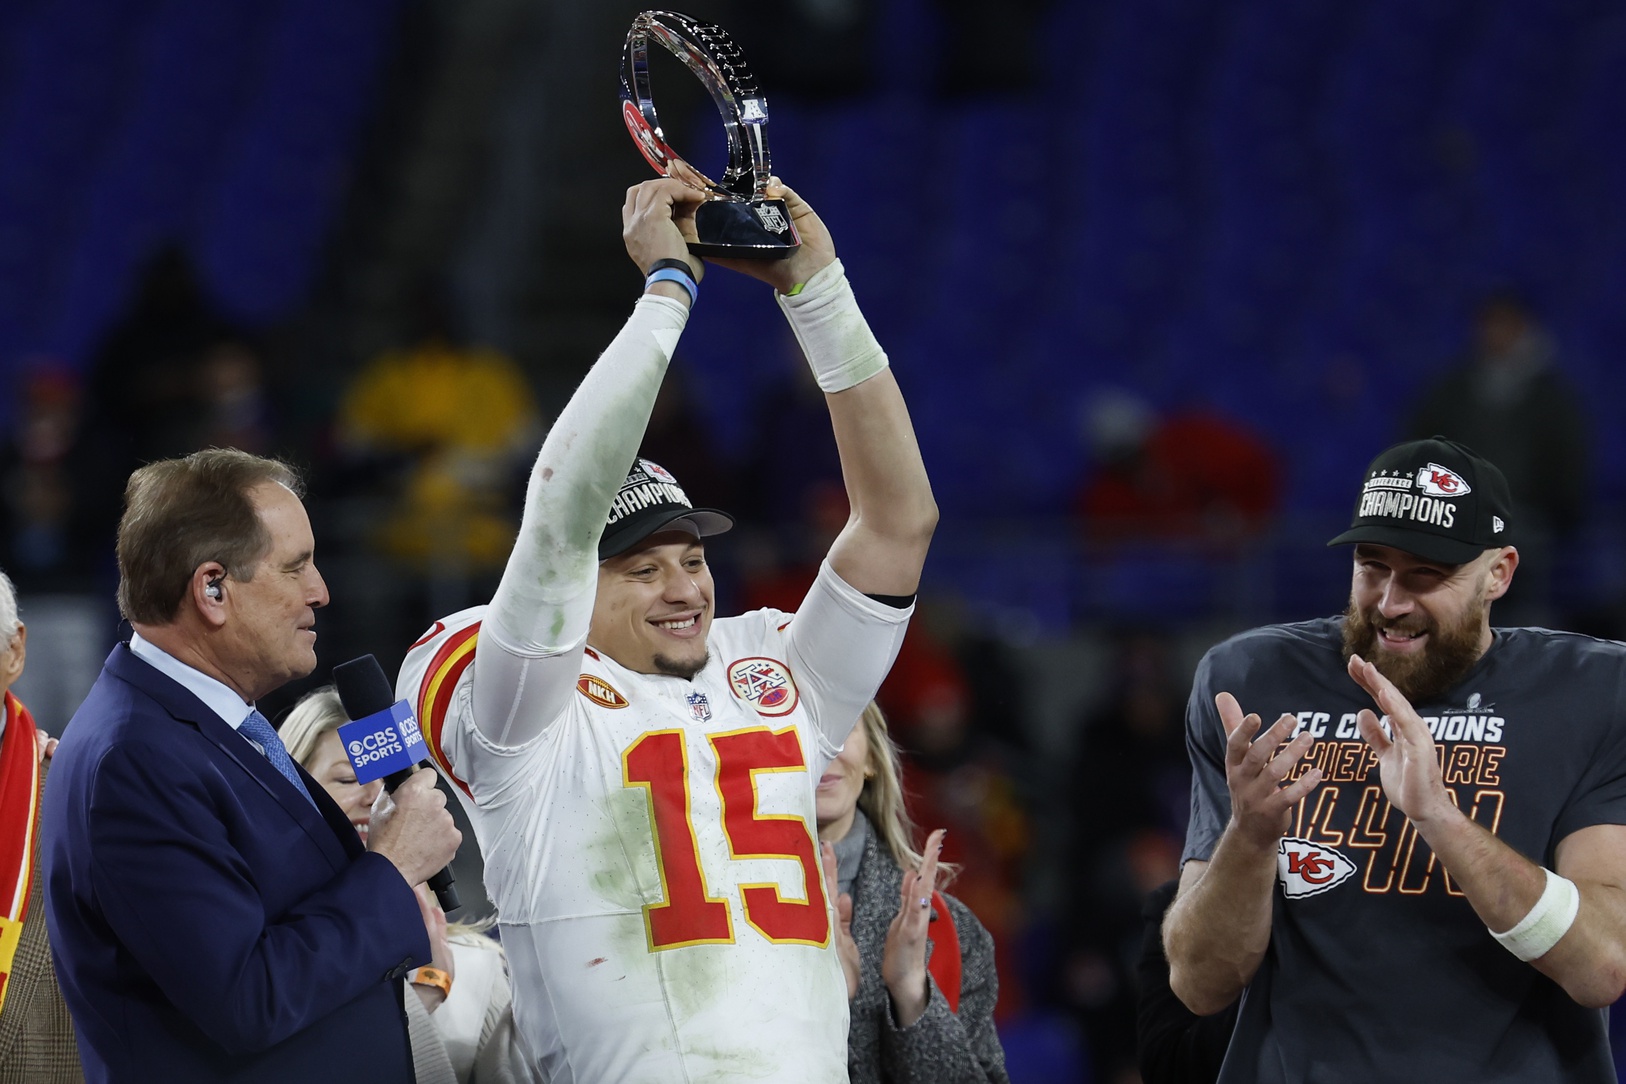 Kansas City Chiefs quarterback Patrick Mahomes (15) celebrates with the Lamar Hunt Trophy while speaking with CBS broadcaster Jim Nance during the trophy presentation after the Chiefs' game against the Baltimore Ravens in the AFC Championship football game at M&T Bank Stadium.